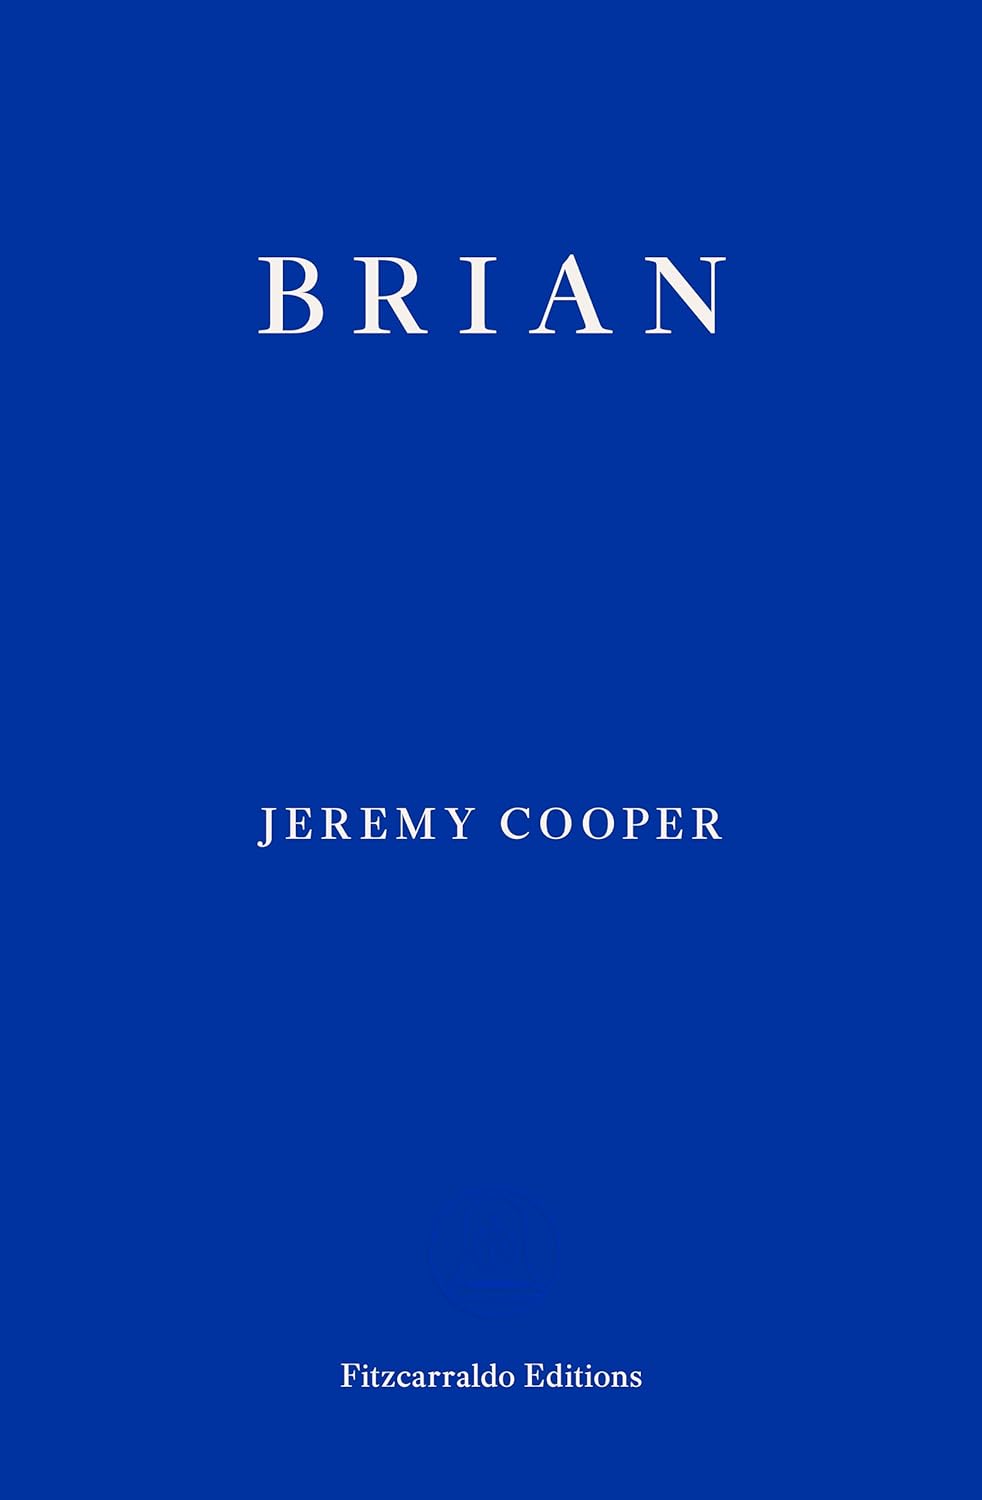 The cover of Brian